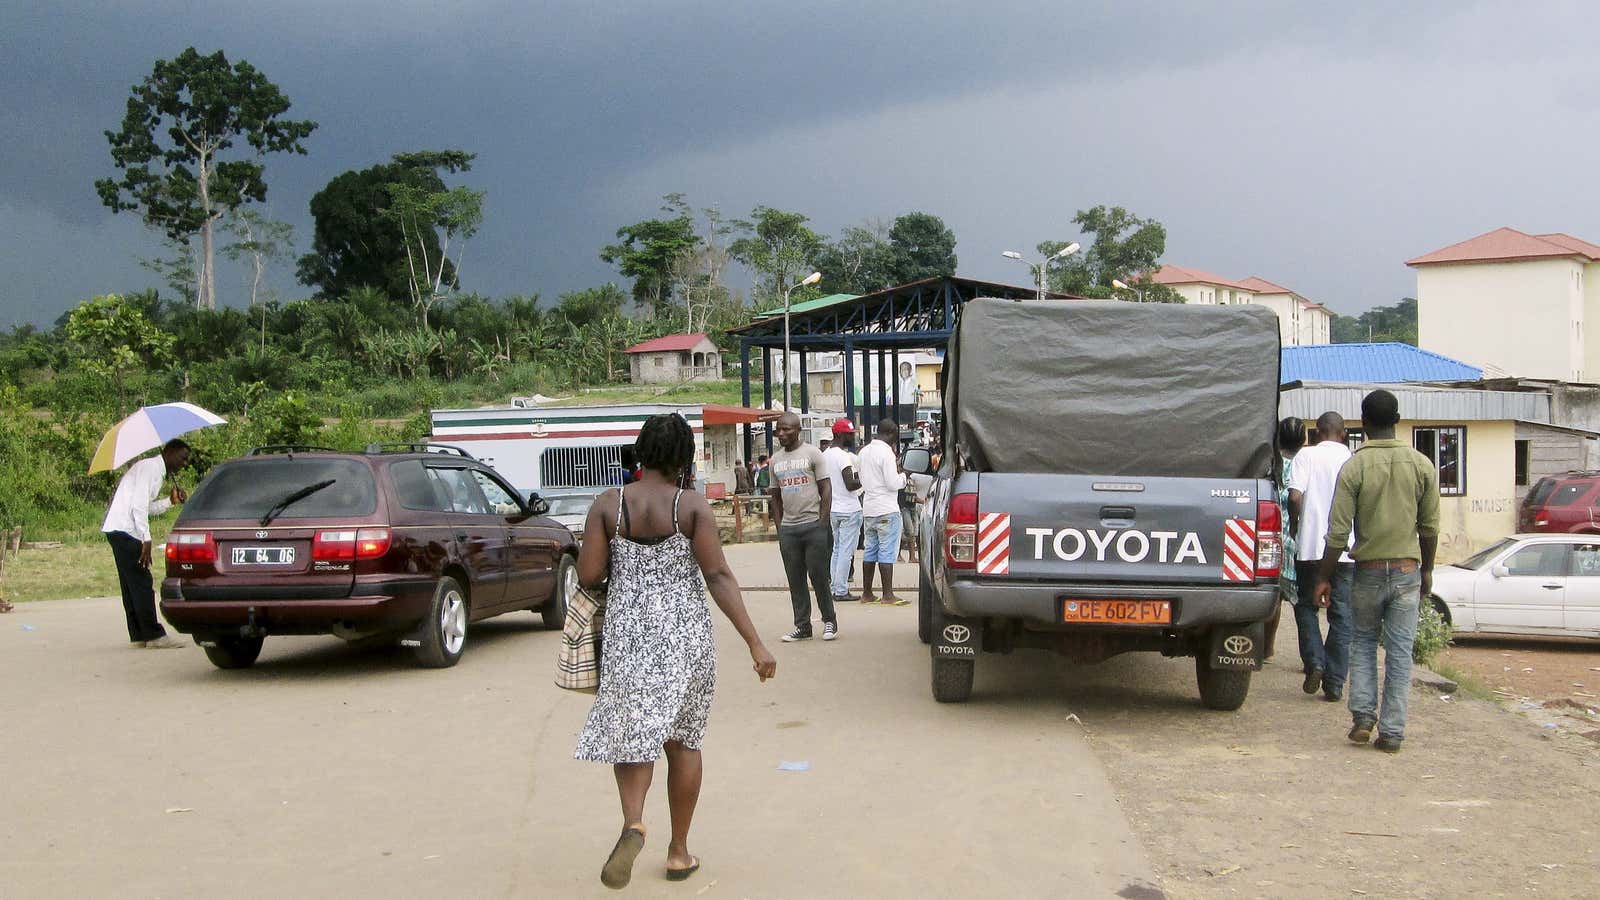 People wait to cross the border into Equatorial Guinea by car and by foot in Kye-Ossi, Cameroon.